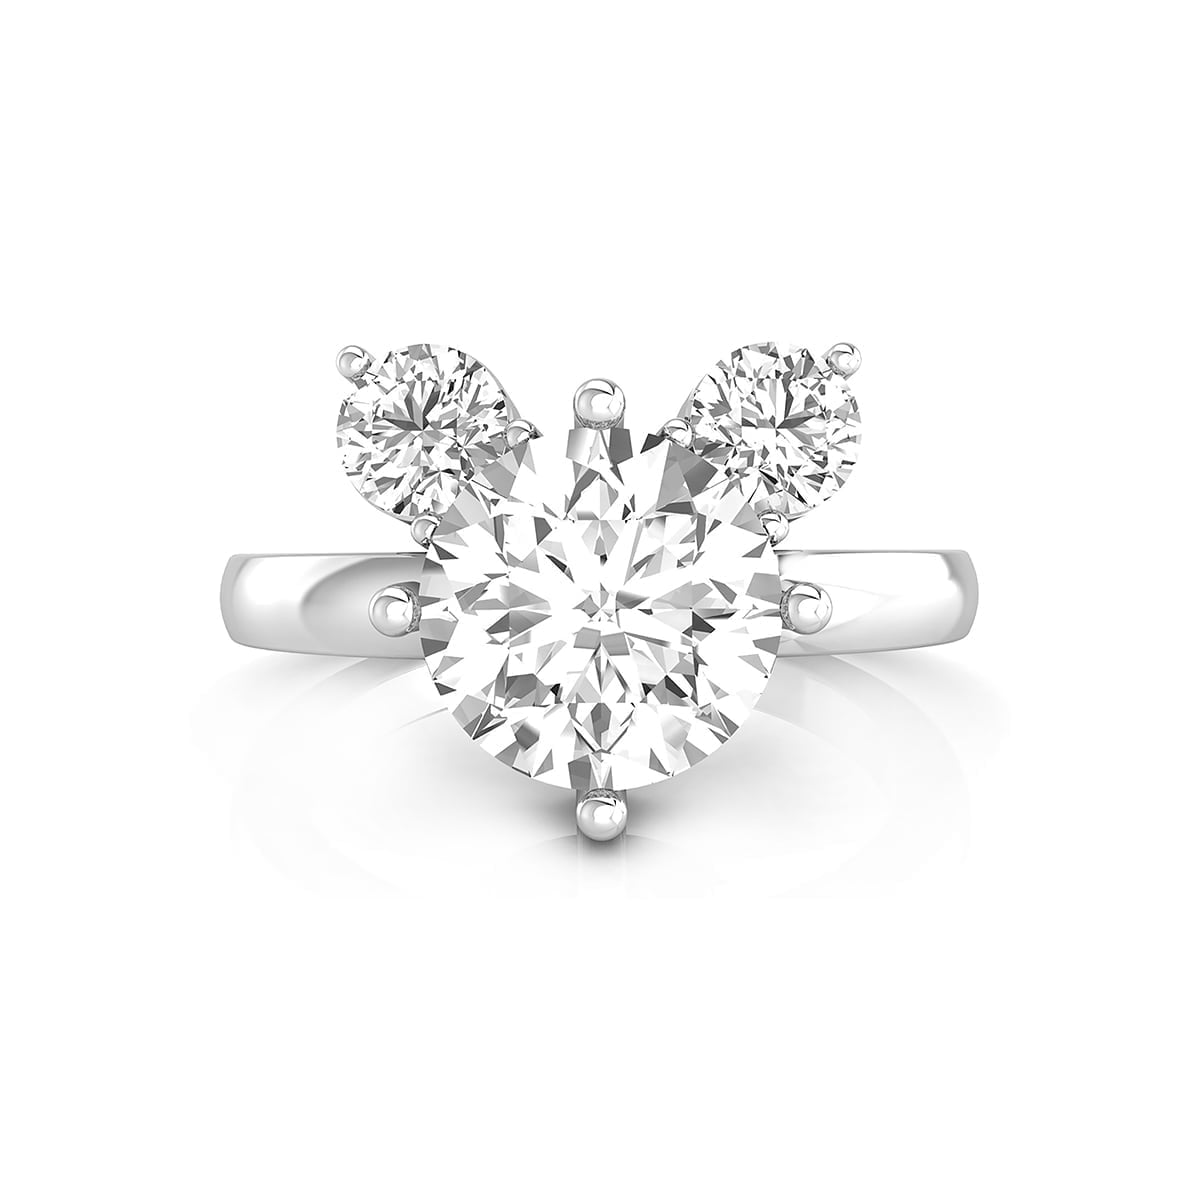 Round Cut Moissanite Fabulous Three Stone Ring For Birthday Gift Or Engagement ( 3 1/2 TCW)